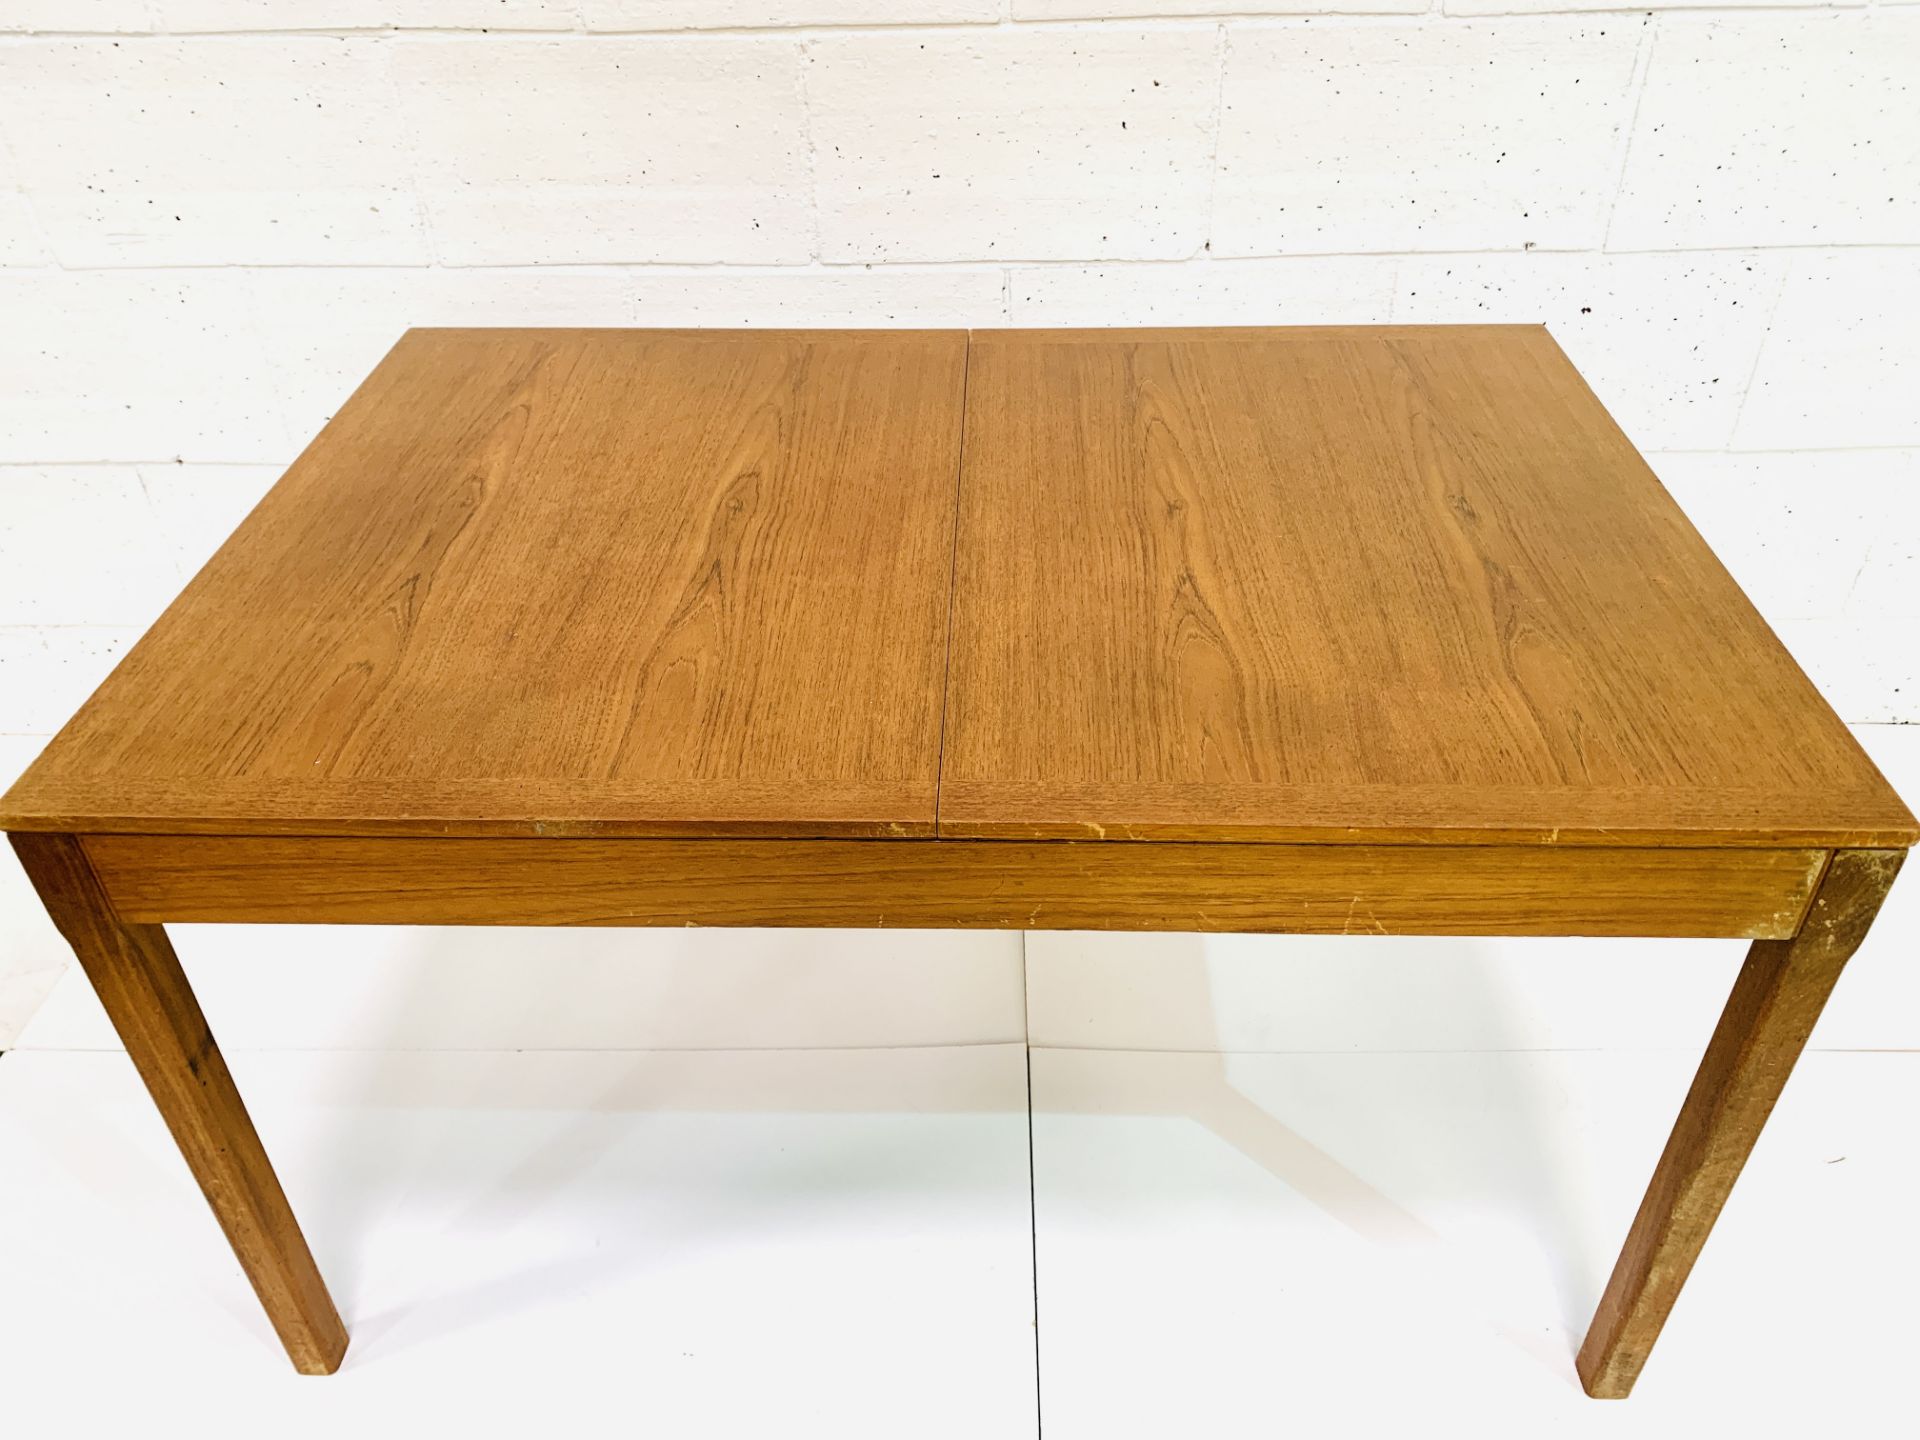 Teak extendable dining table - Image 2 of 4